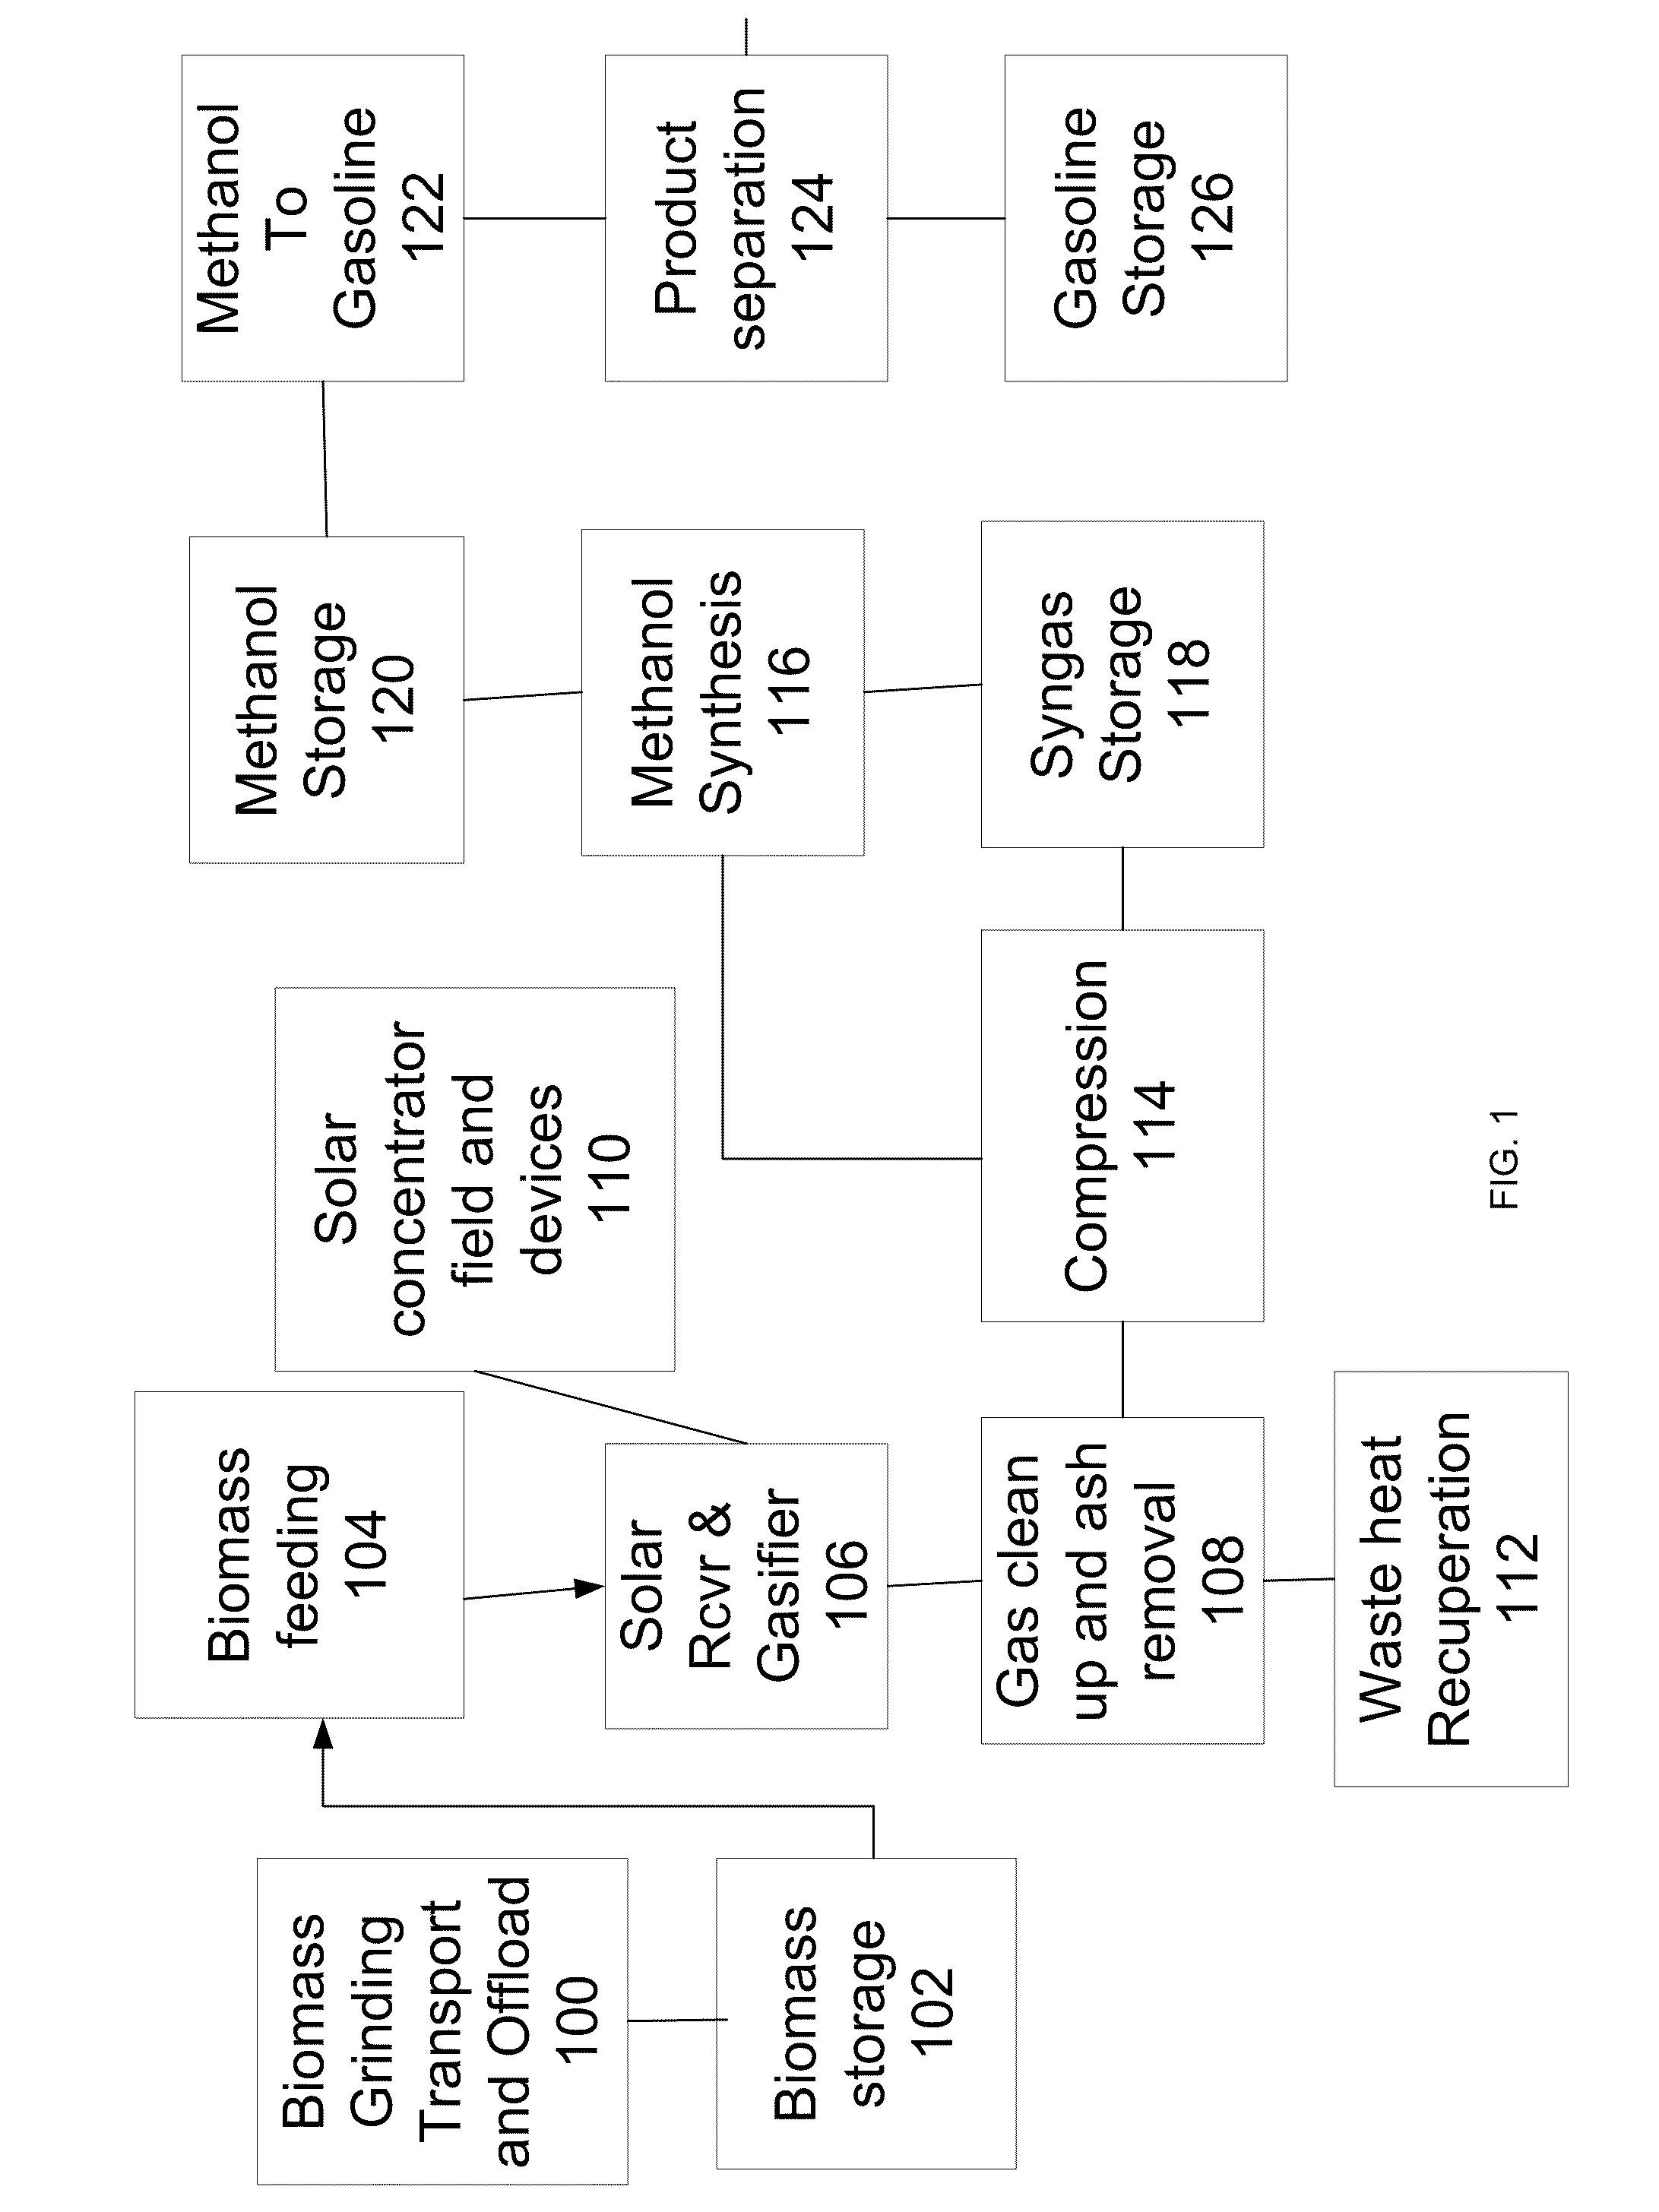 Systems and methods for cyclic operations in a fuel synthesis process